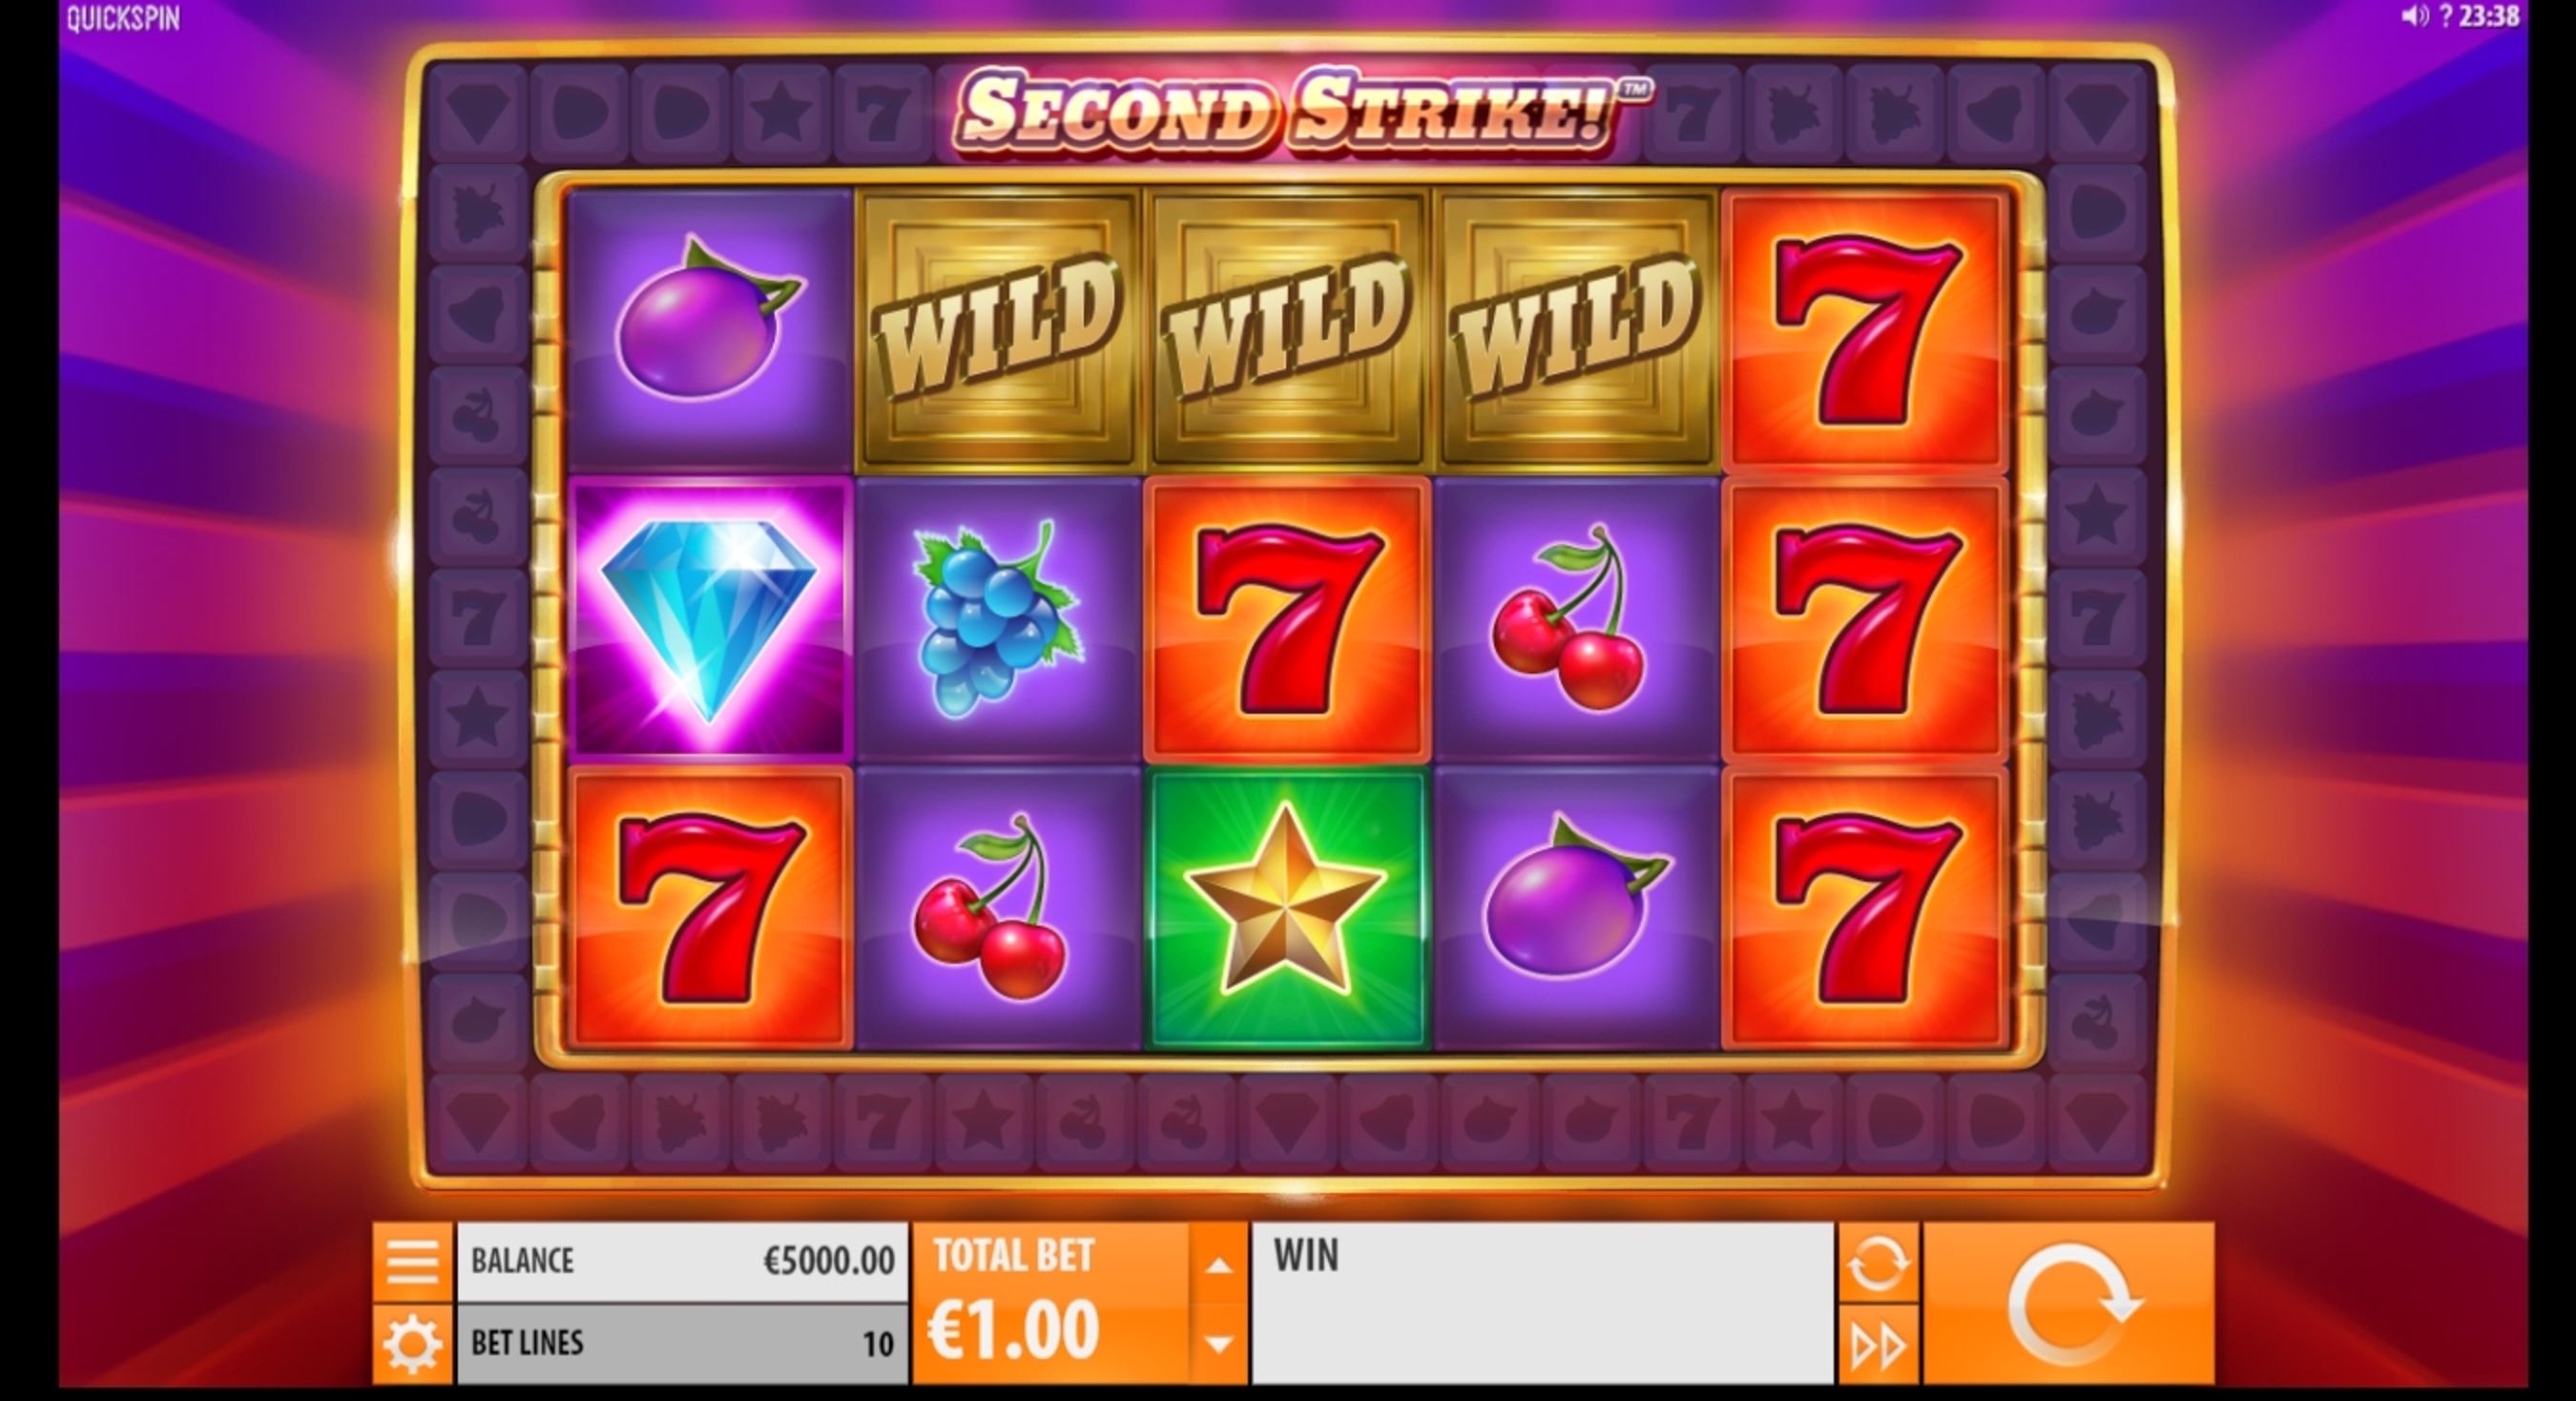 Reels in Second Strike Slot Game by Quickspin